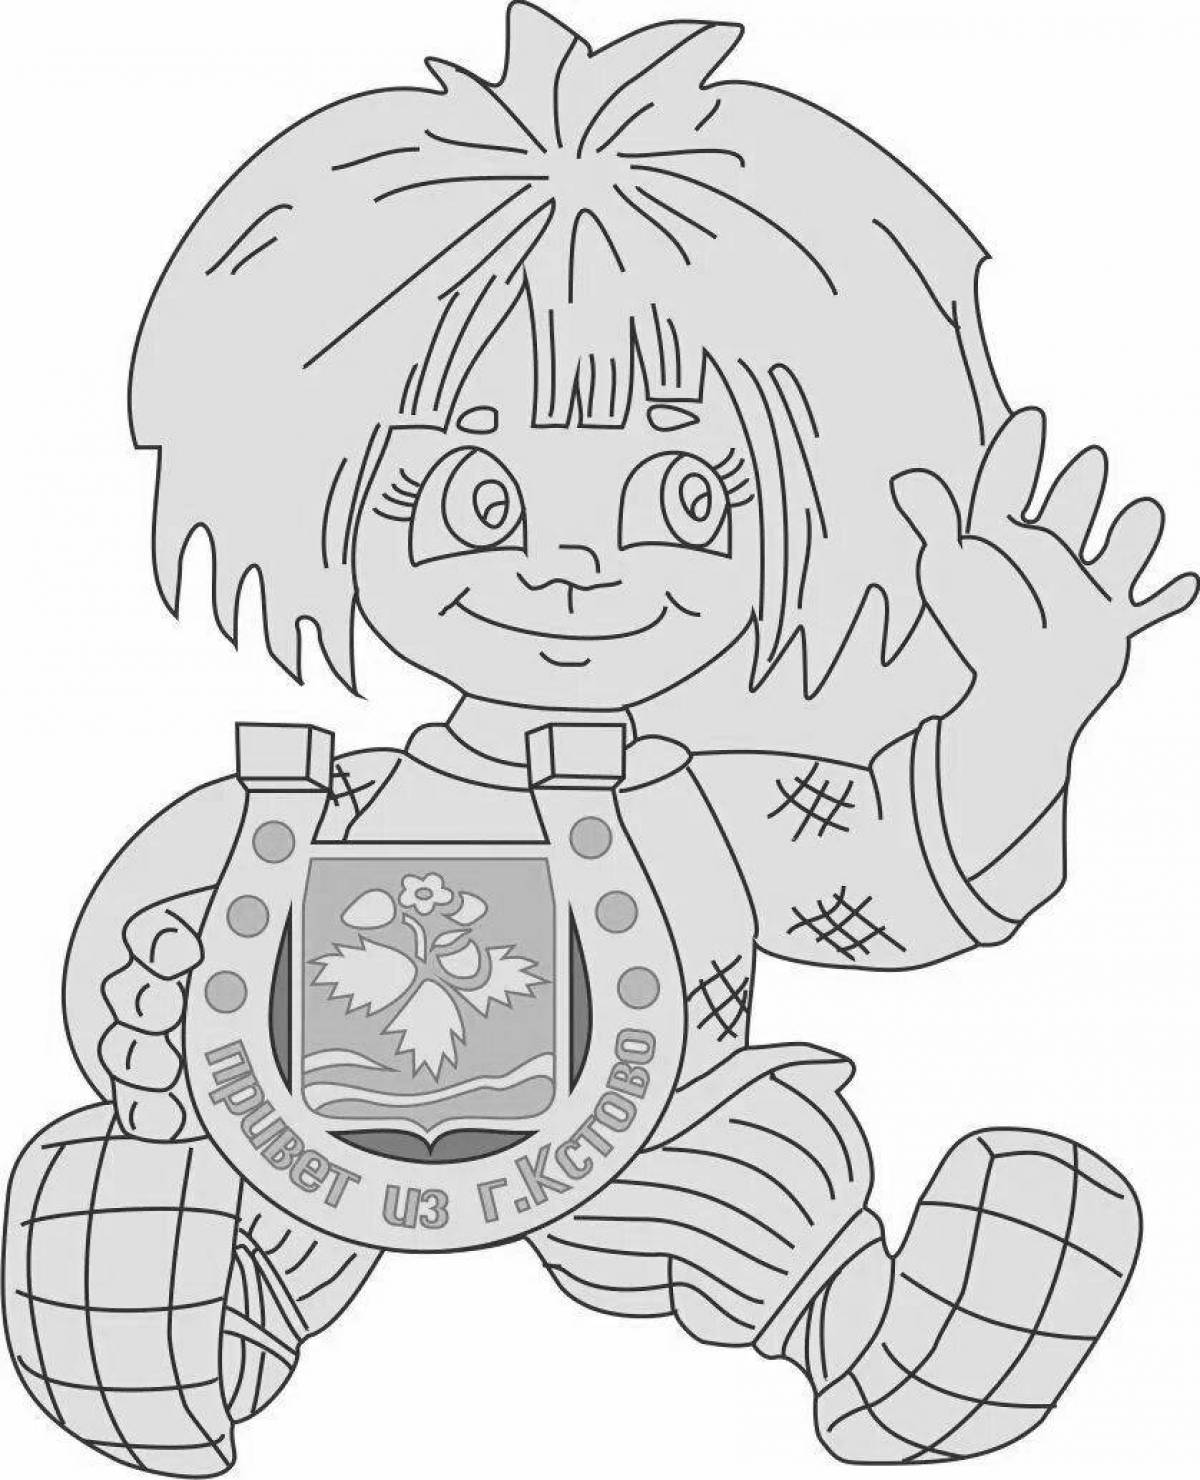 Shining brownie coloring page